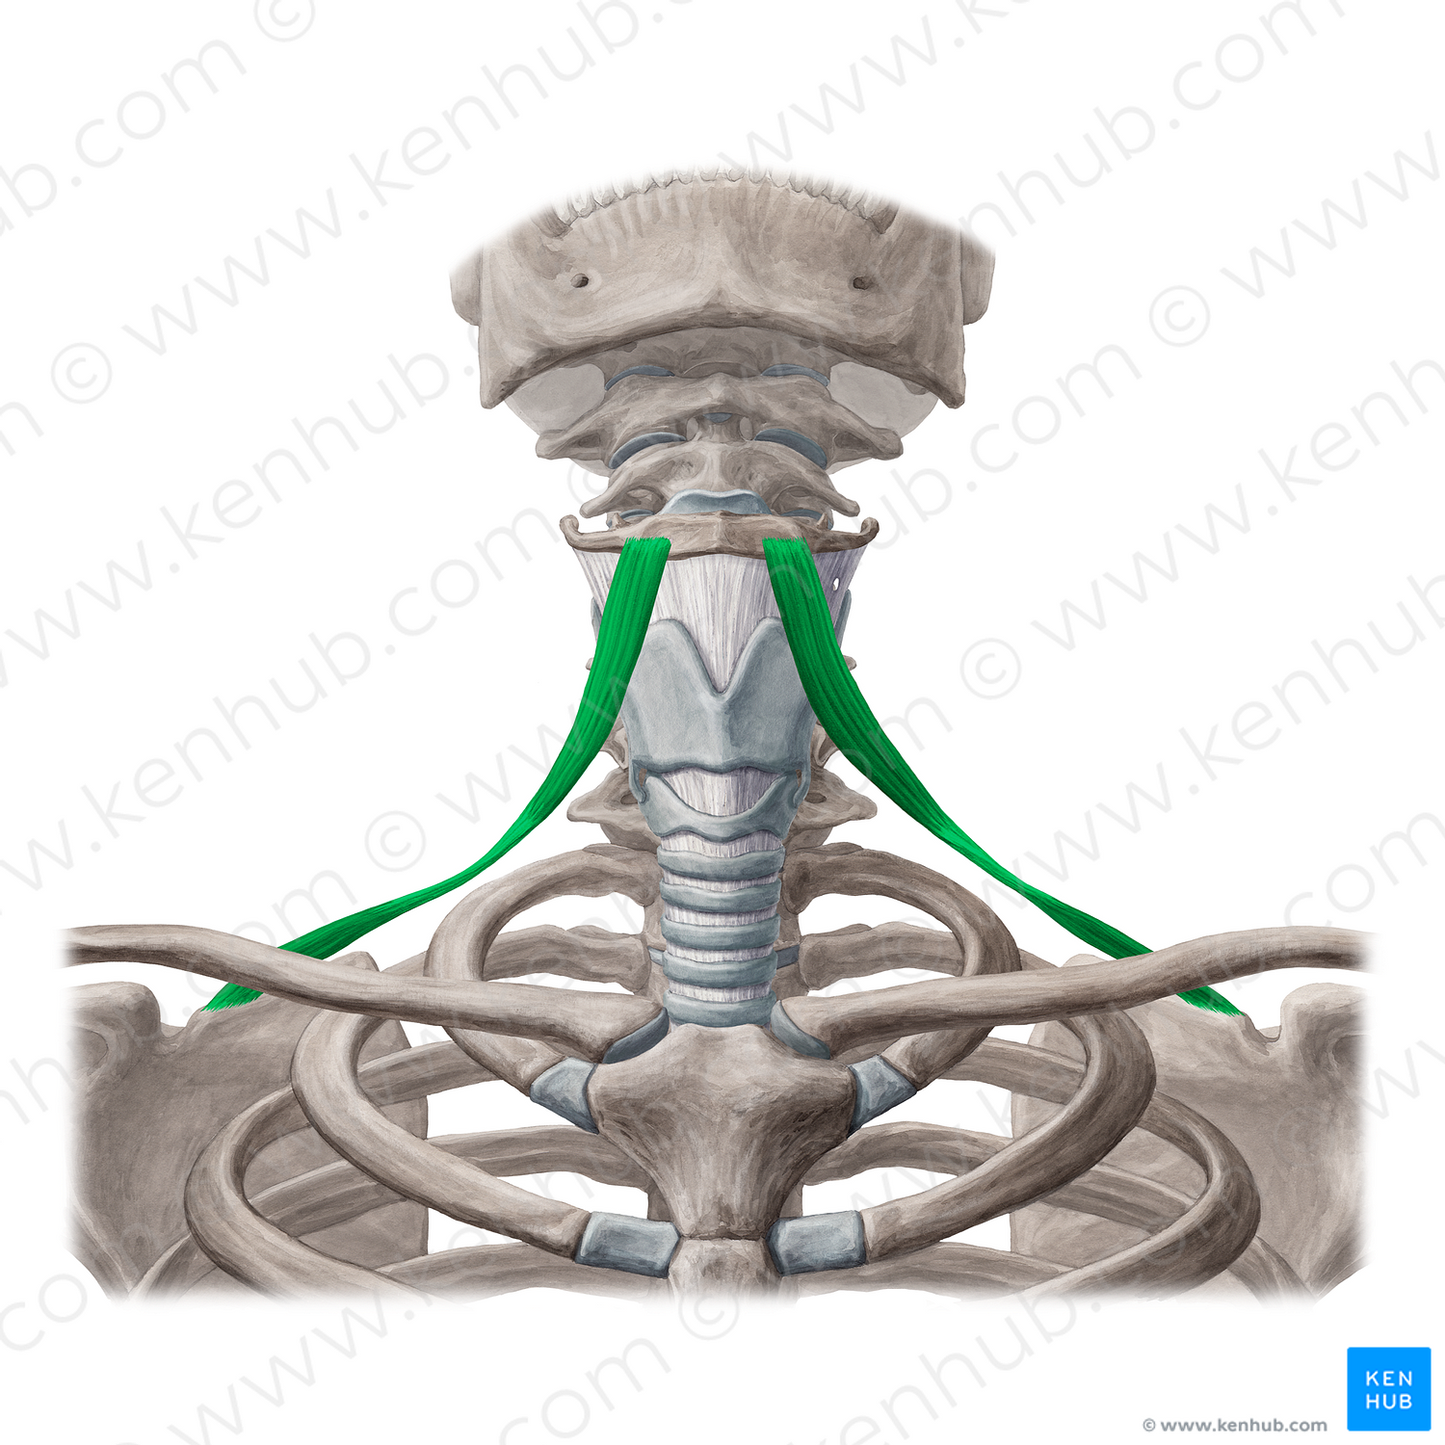 Omohyoid muscle (#5684)